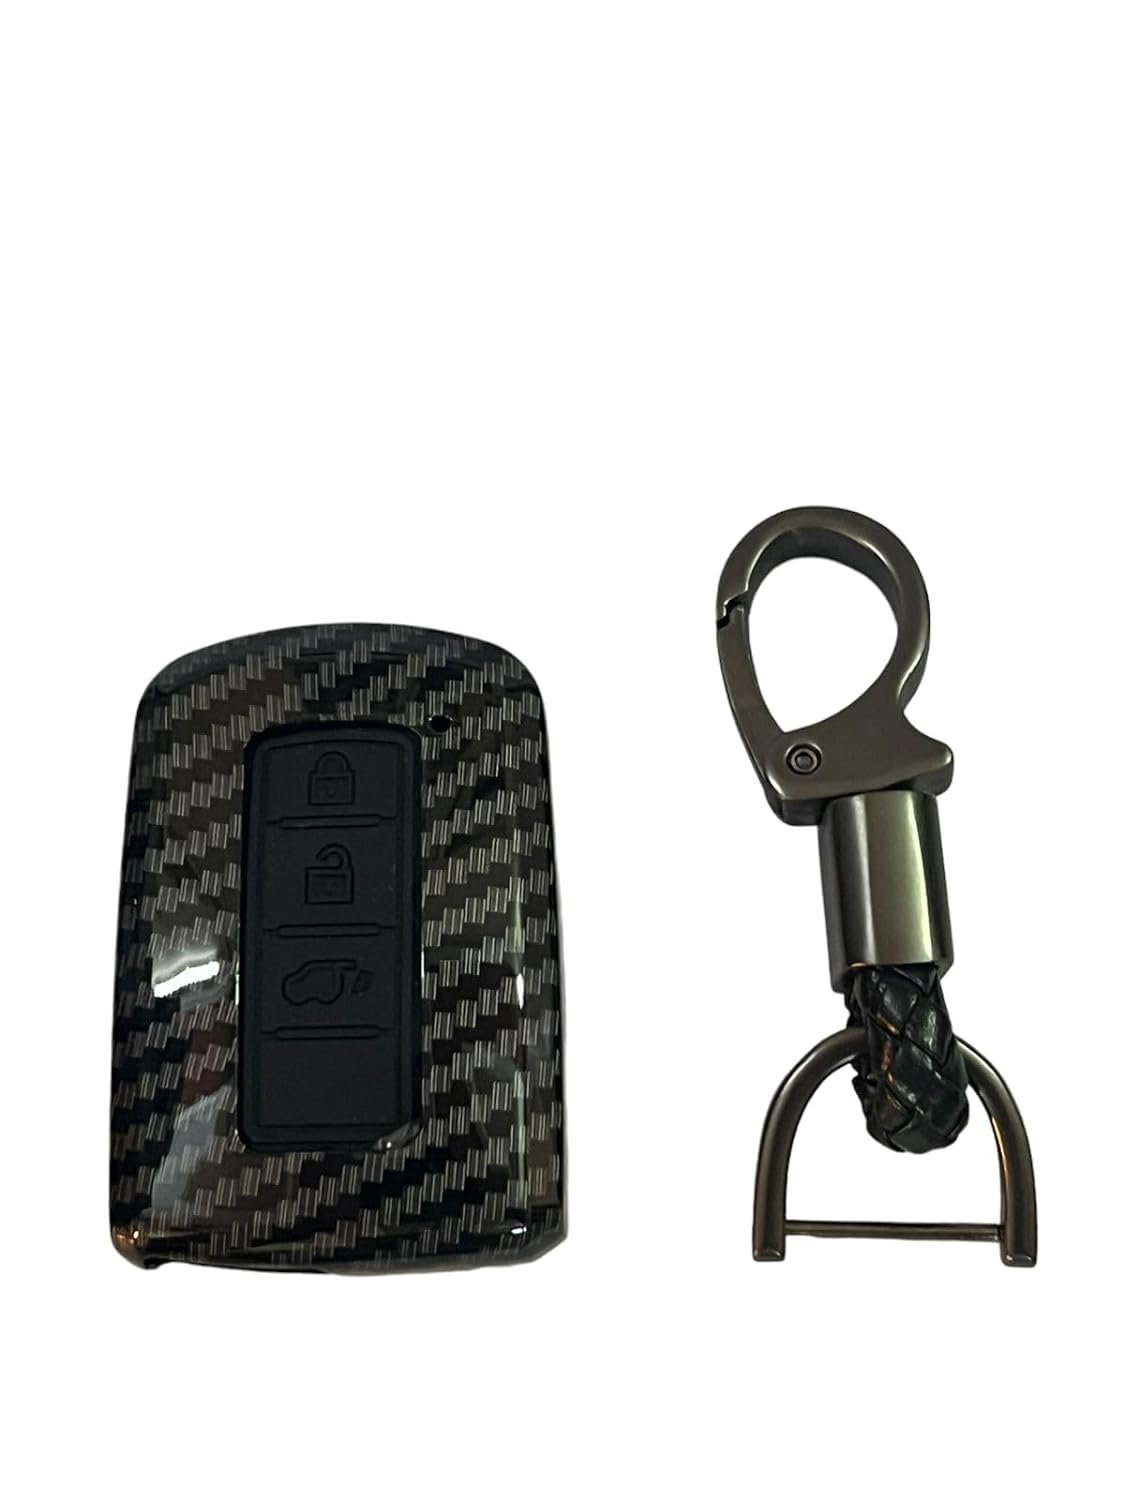 Carbon Fiber ABS Car Key Cover Compatible with Toyota Corolla Altis Smart Key (Key Chain Included) Image 